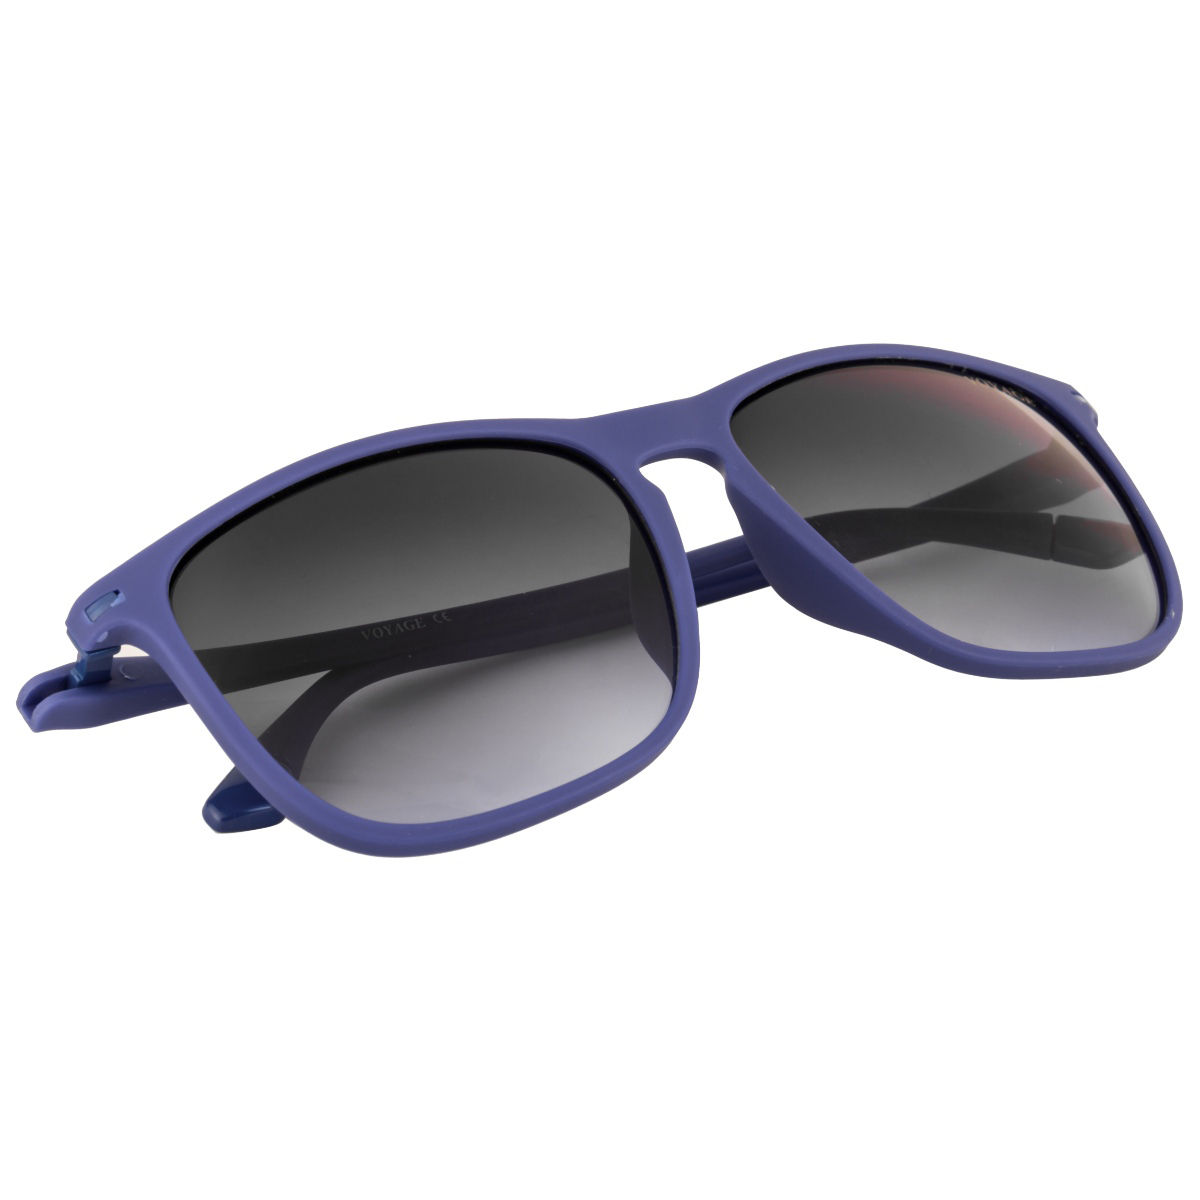 Voyage Unisex Square Sunglasses KS8072MG2830 Price in India, Full  Specifications & Offers | DTashion.com